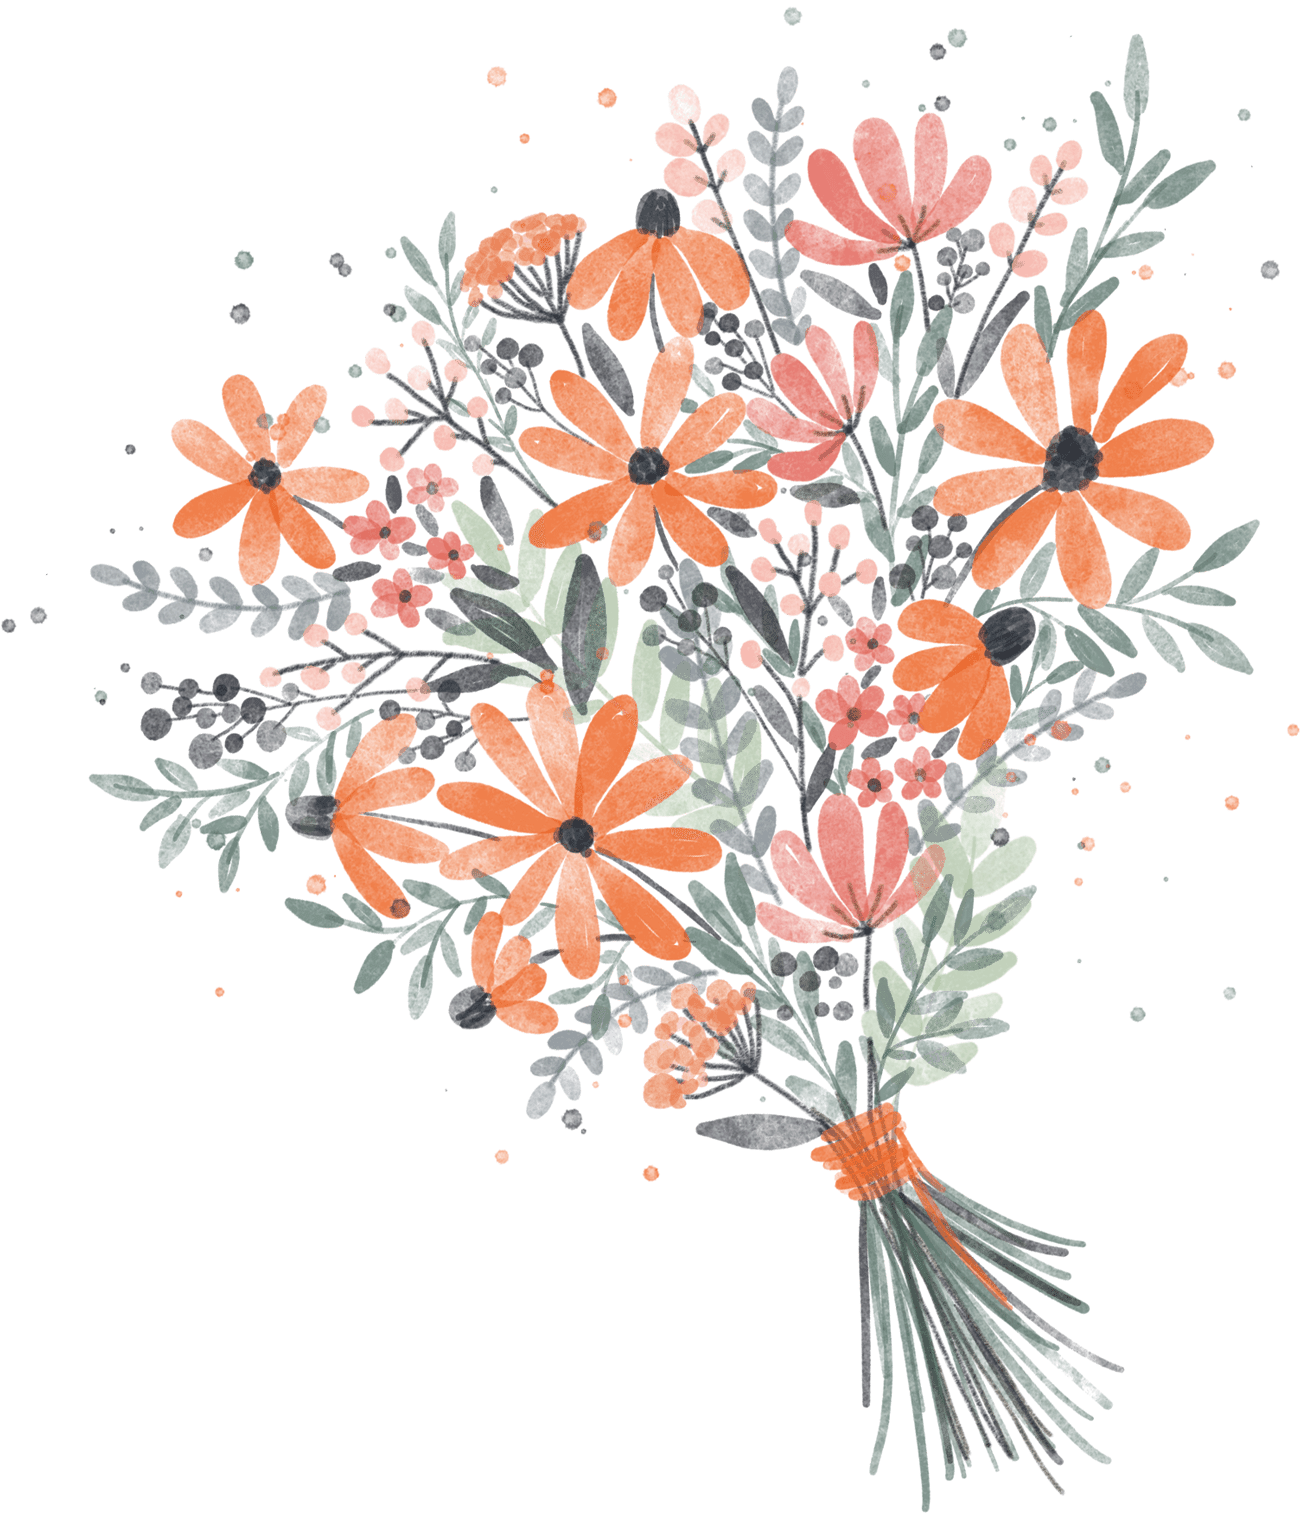 Procreate Watercolor Flowers Stamps - Design Cuts